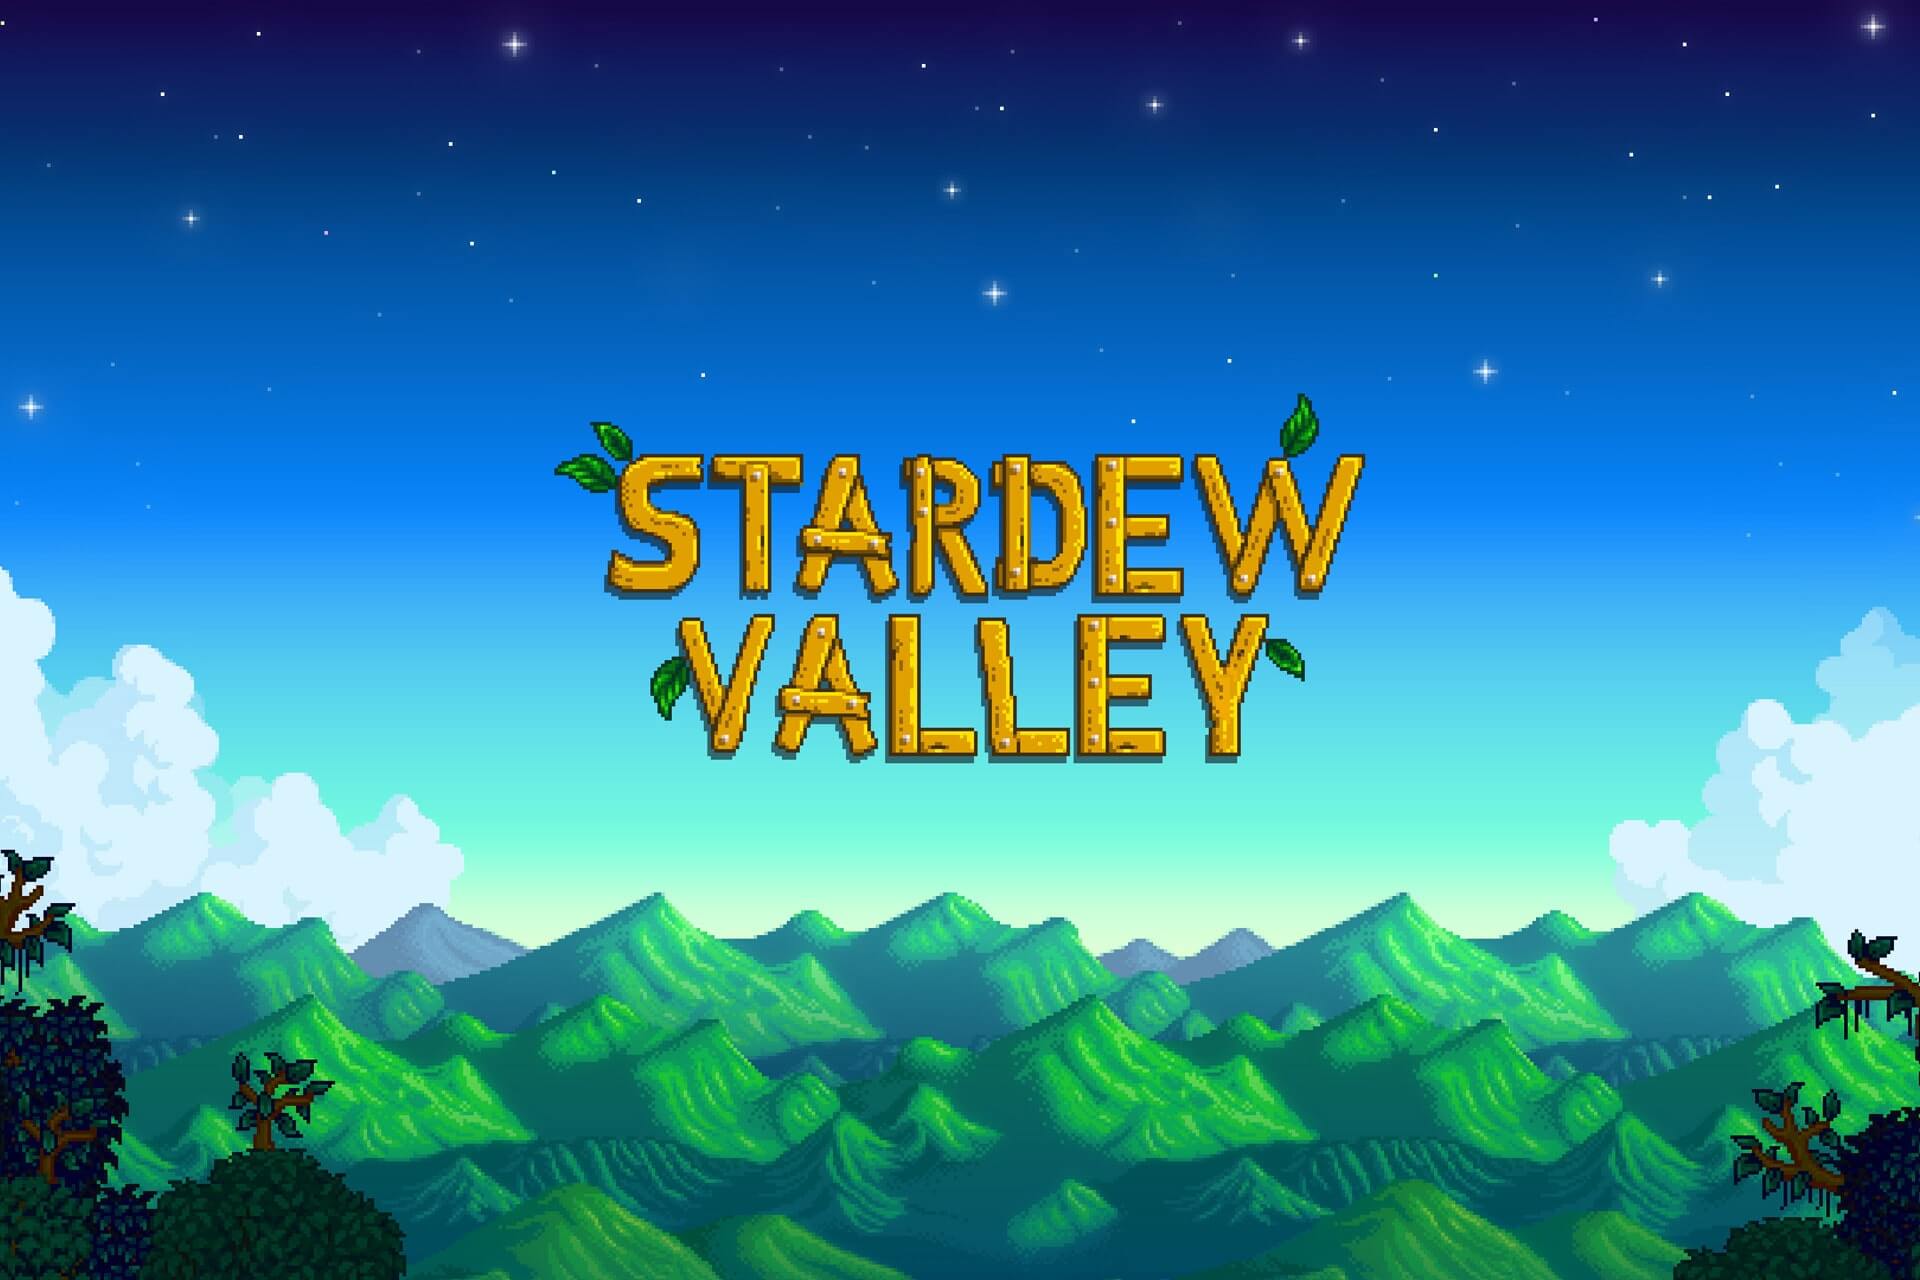 fix Stardew Valley lag with a VPN